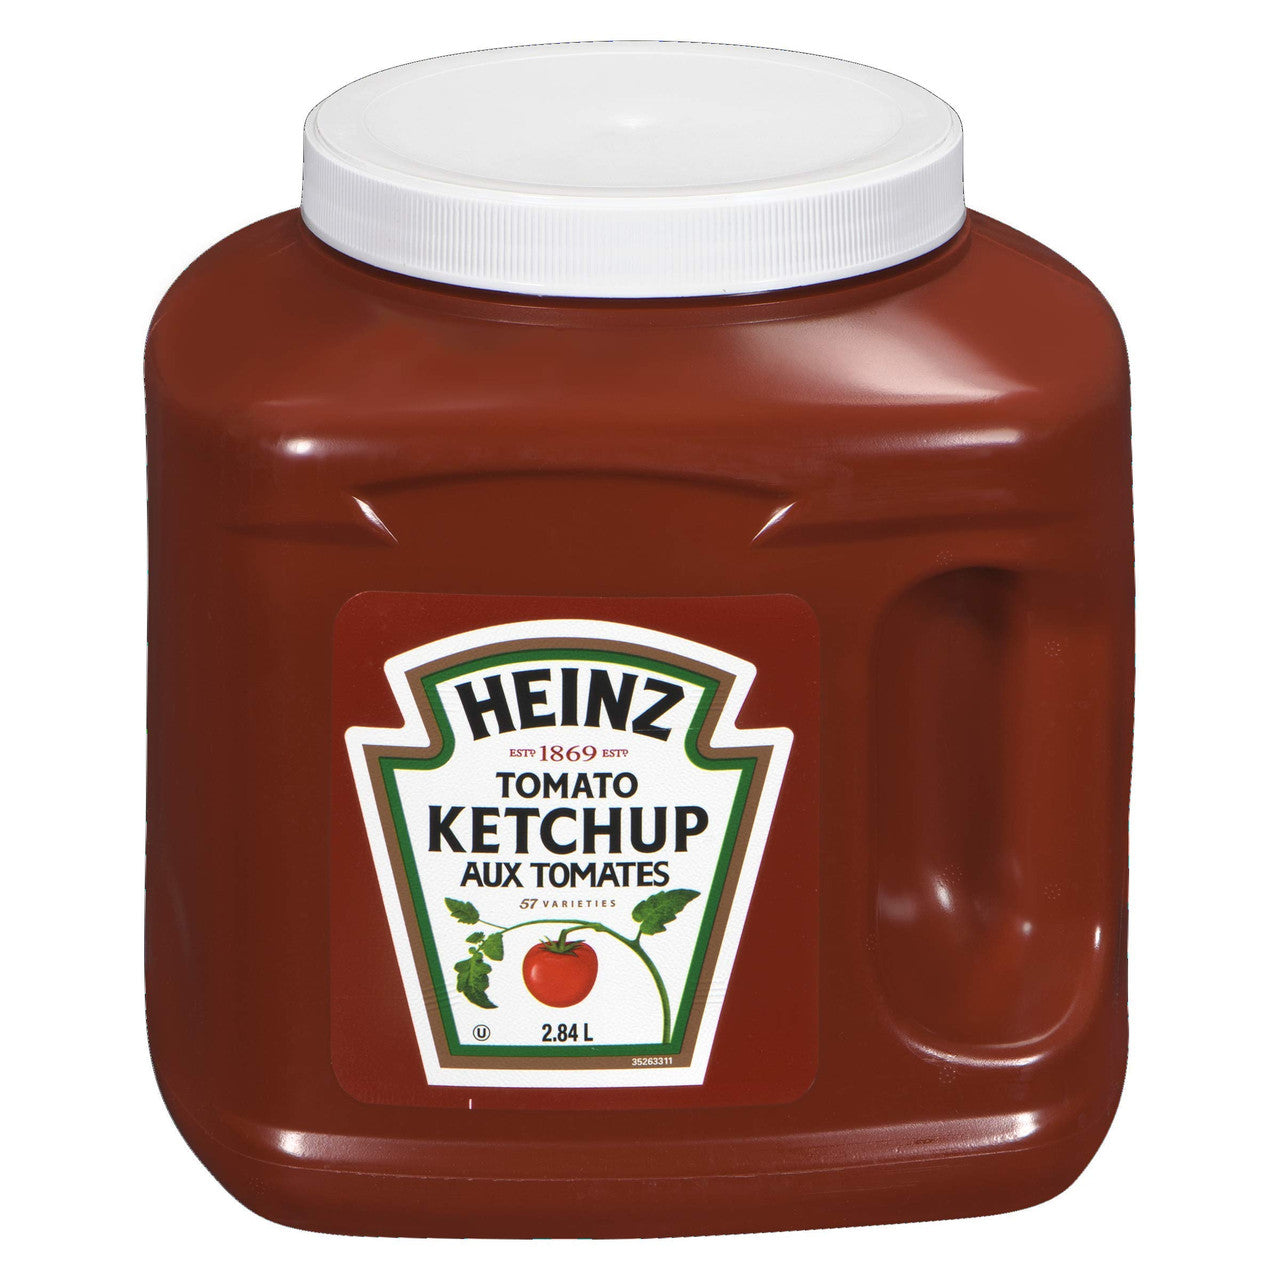 Heinz Big Red Tomato Ketchup Jug, 2.84L/96 fl.oz., {Imported from Canada}